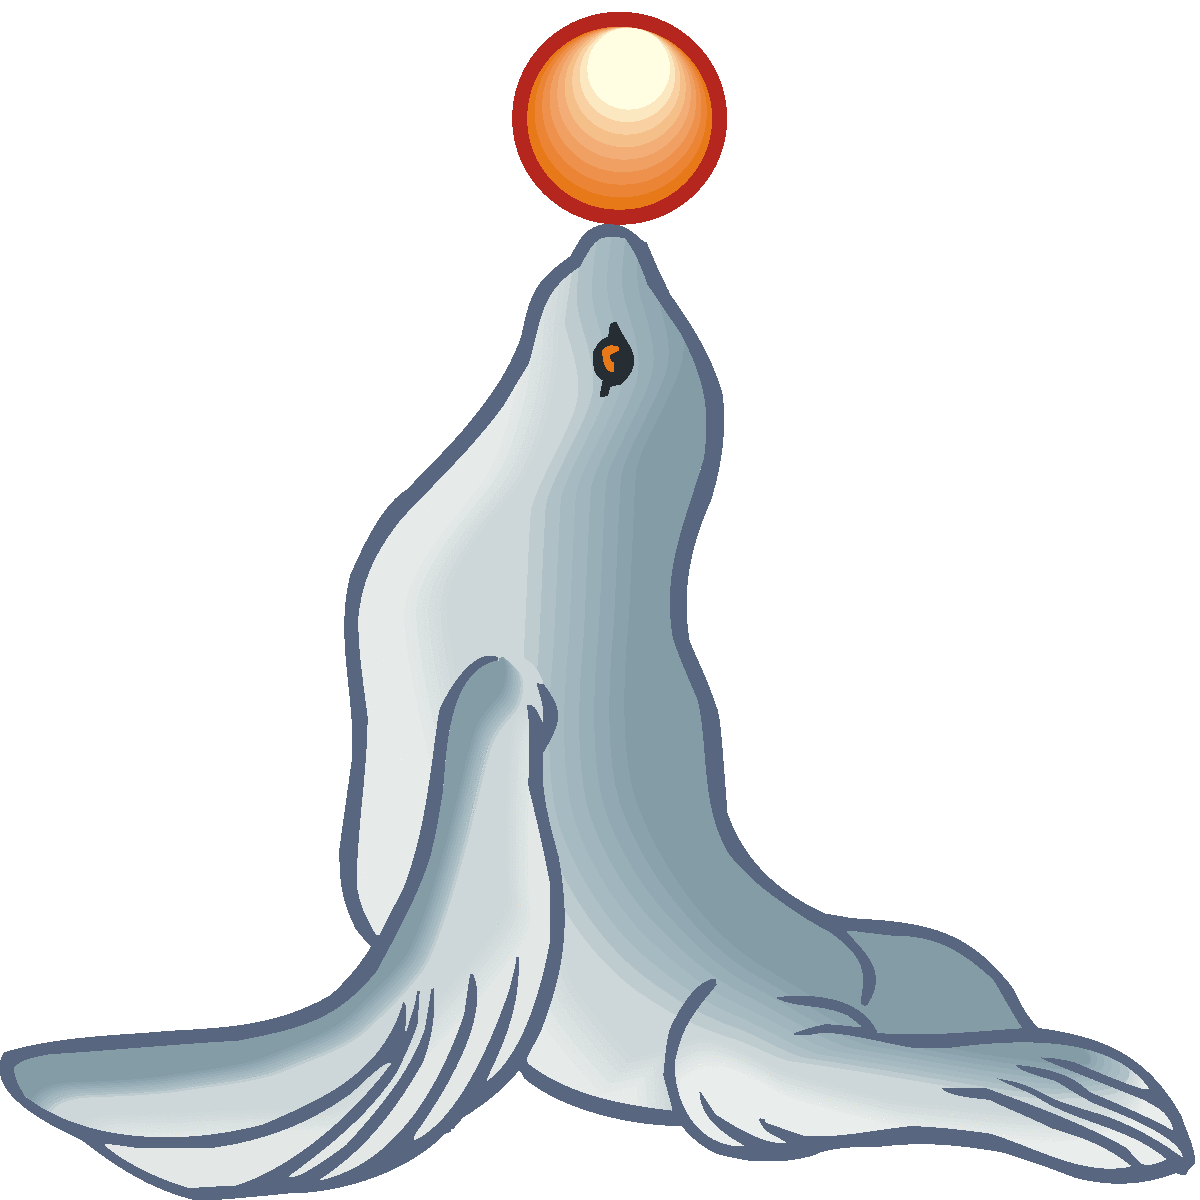 Click The Sea Lion Clipart Image To See A Larger Version Of The    